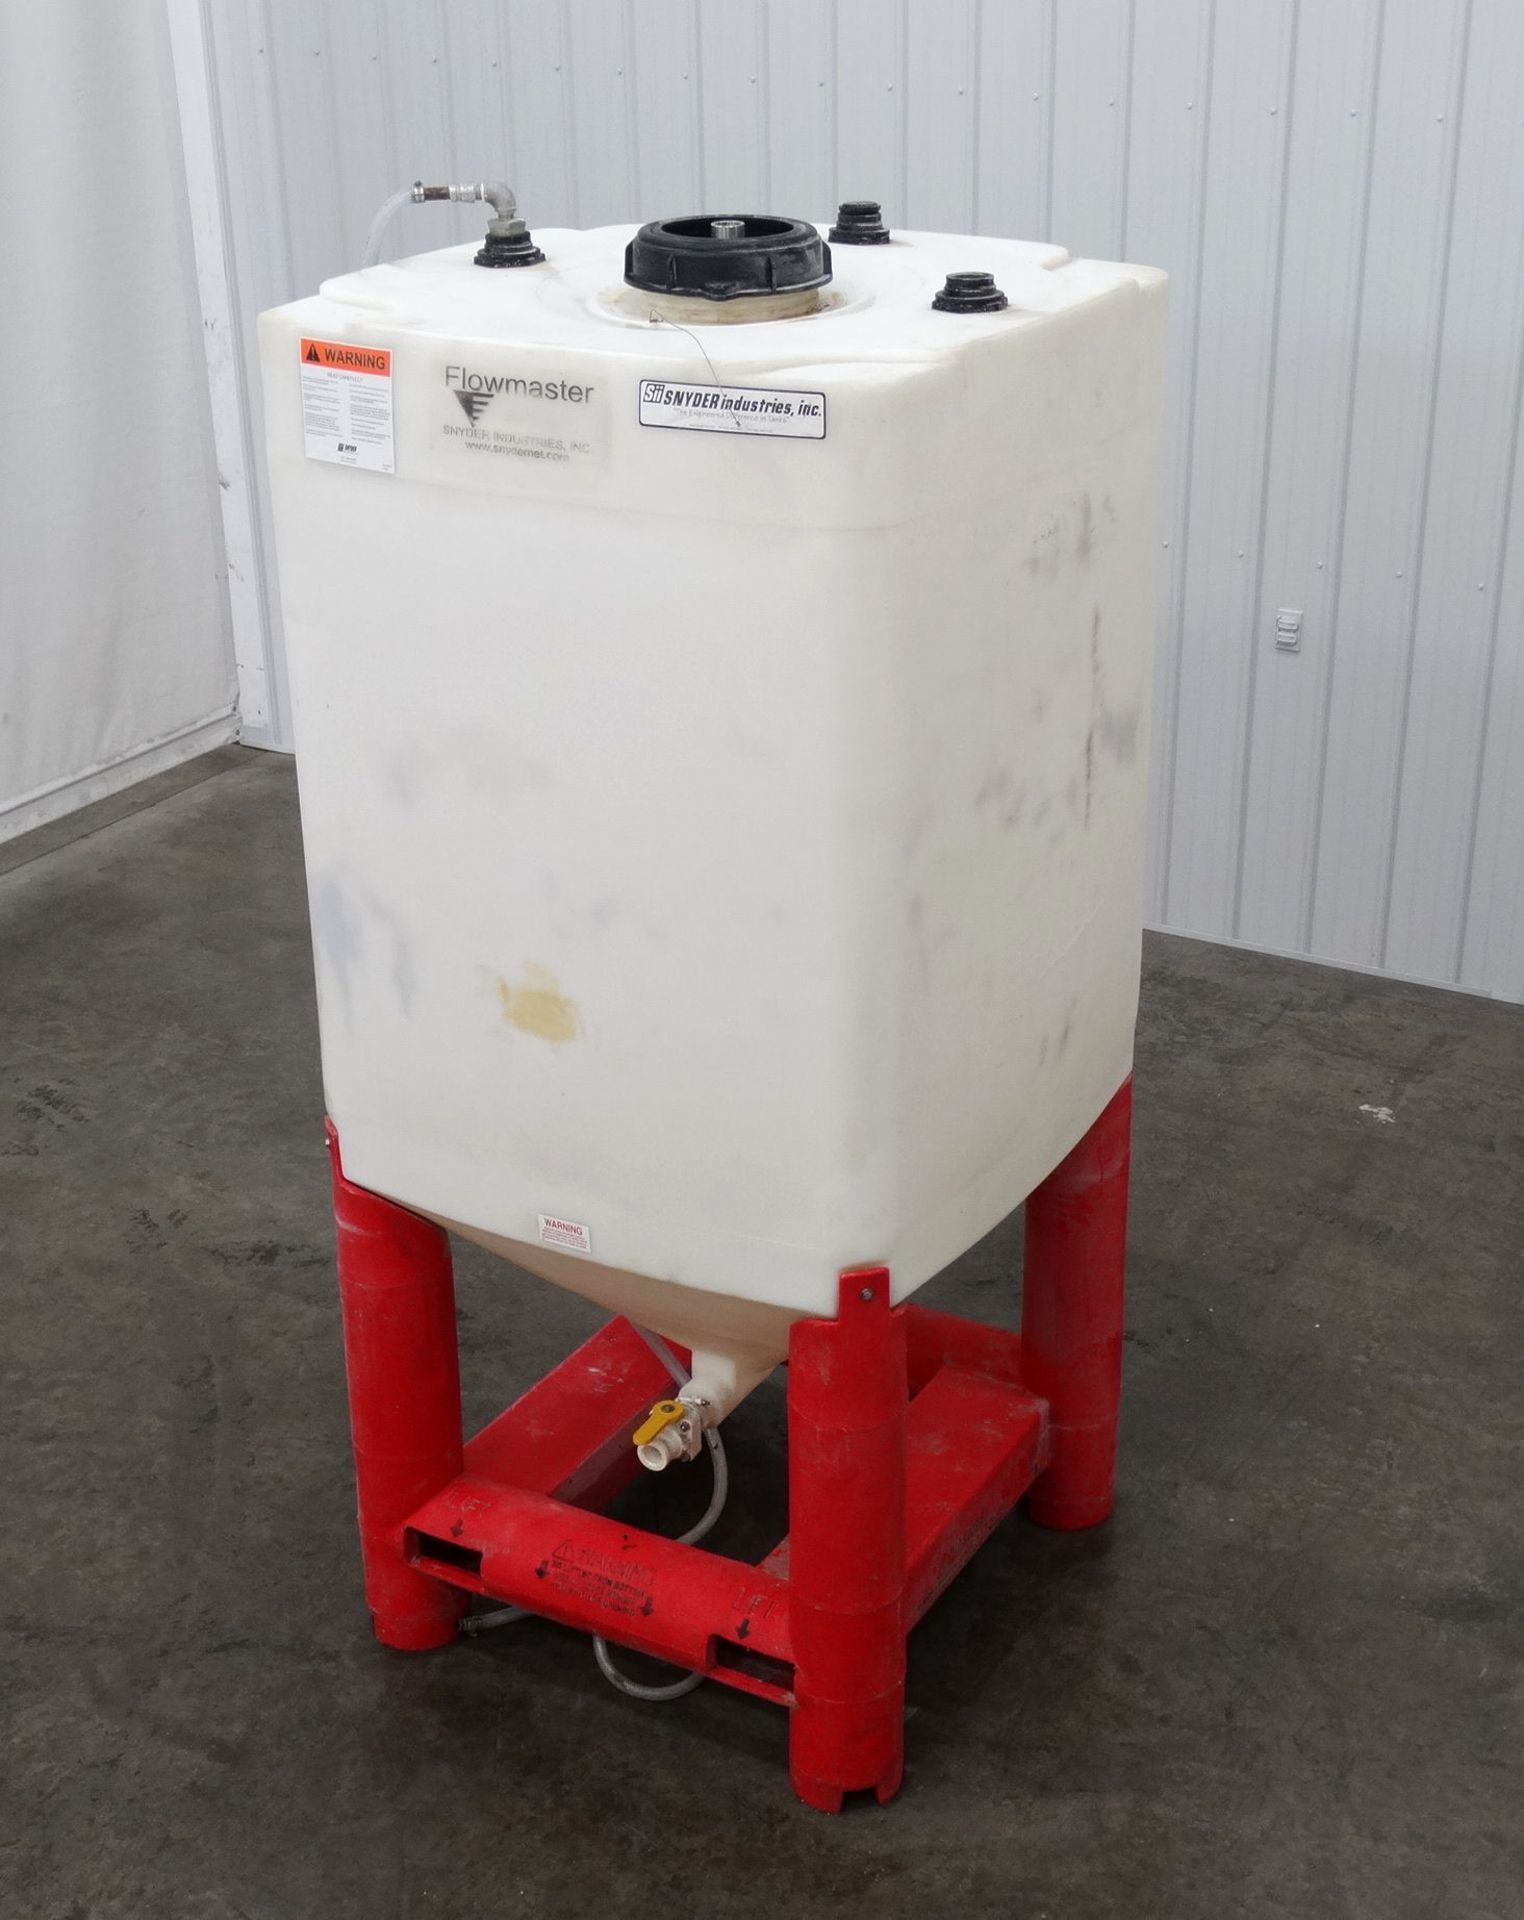 Snyder Industries 500 Gallon Flowmaster Tote B4403 - Image 4 of 12